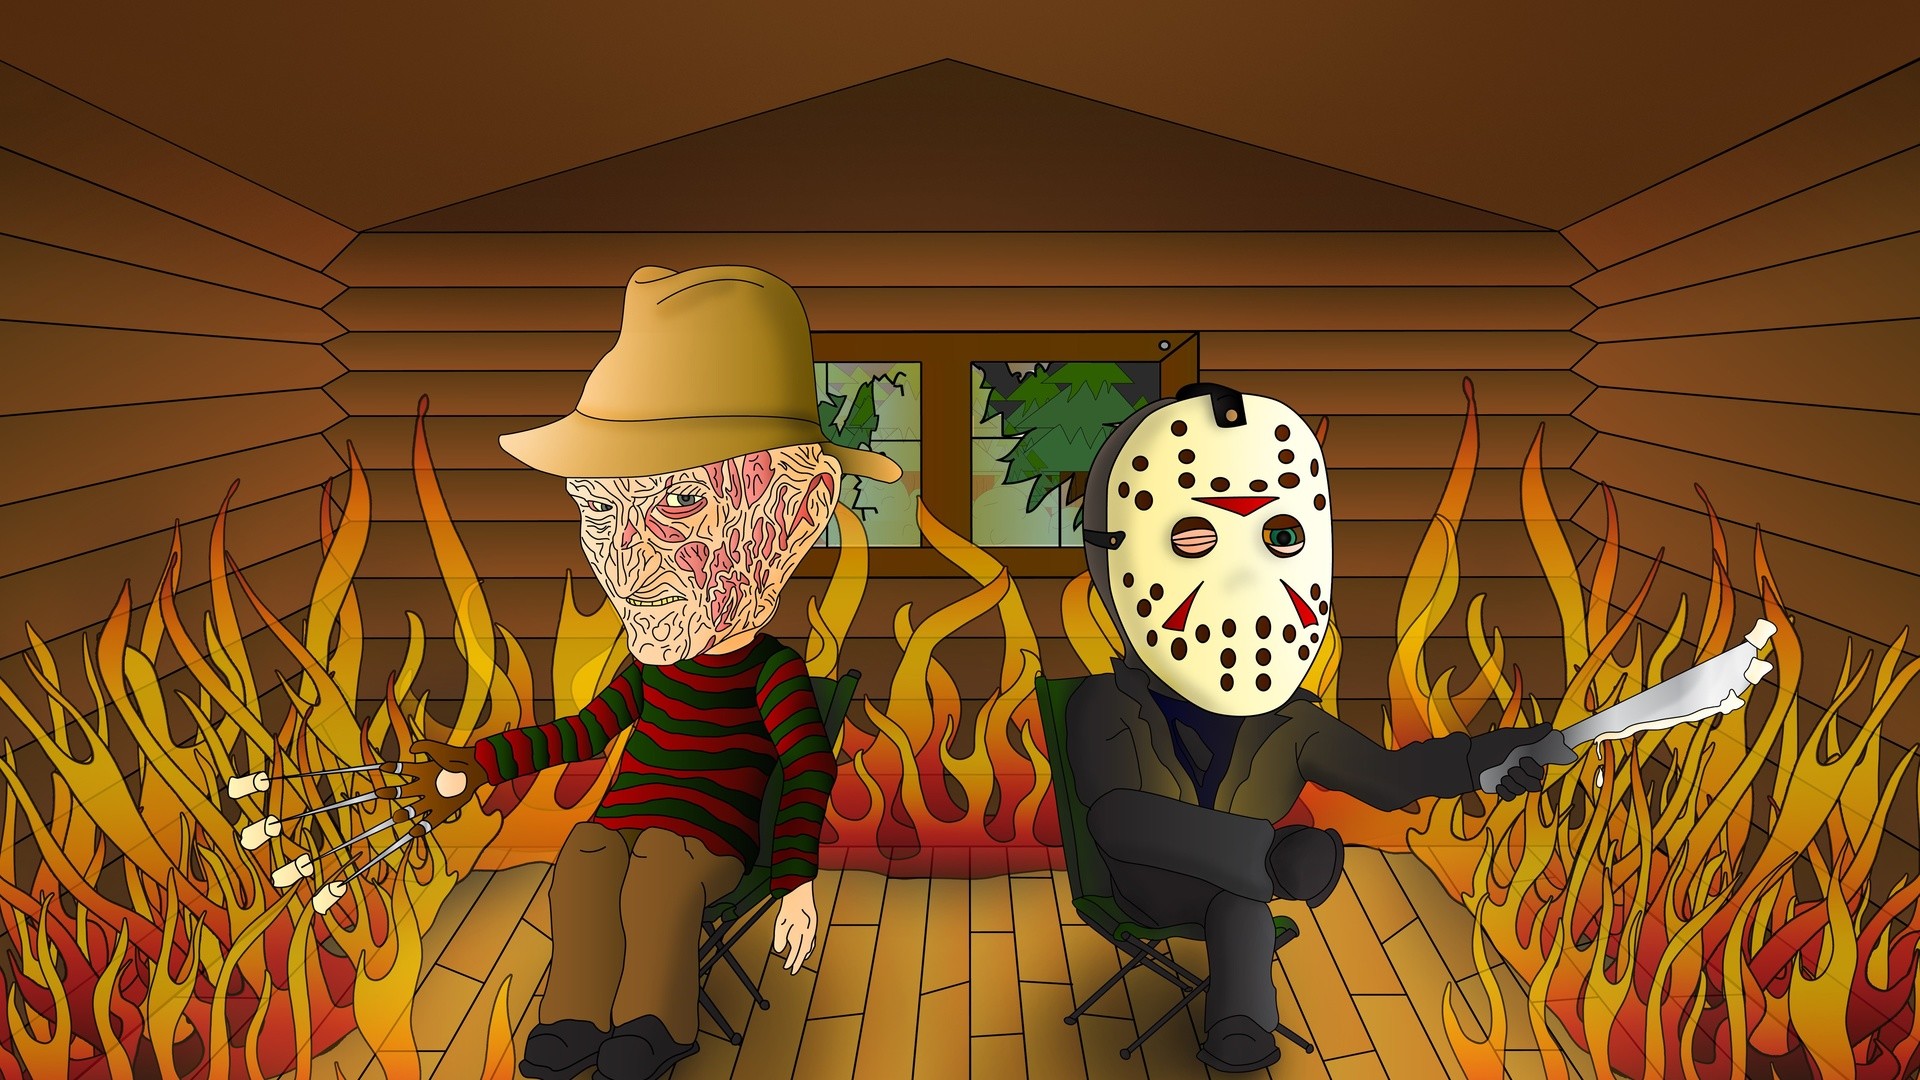 1920x1080 ... Freddy vs. Jason wallpaper (6 images) pictures download ...